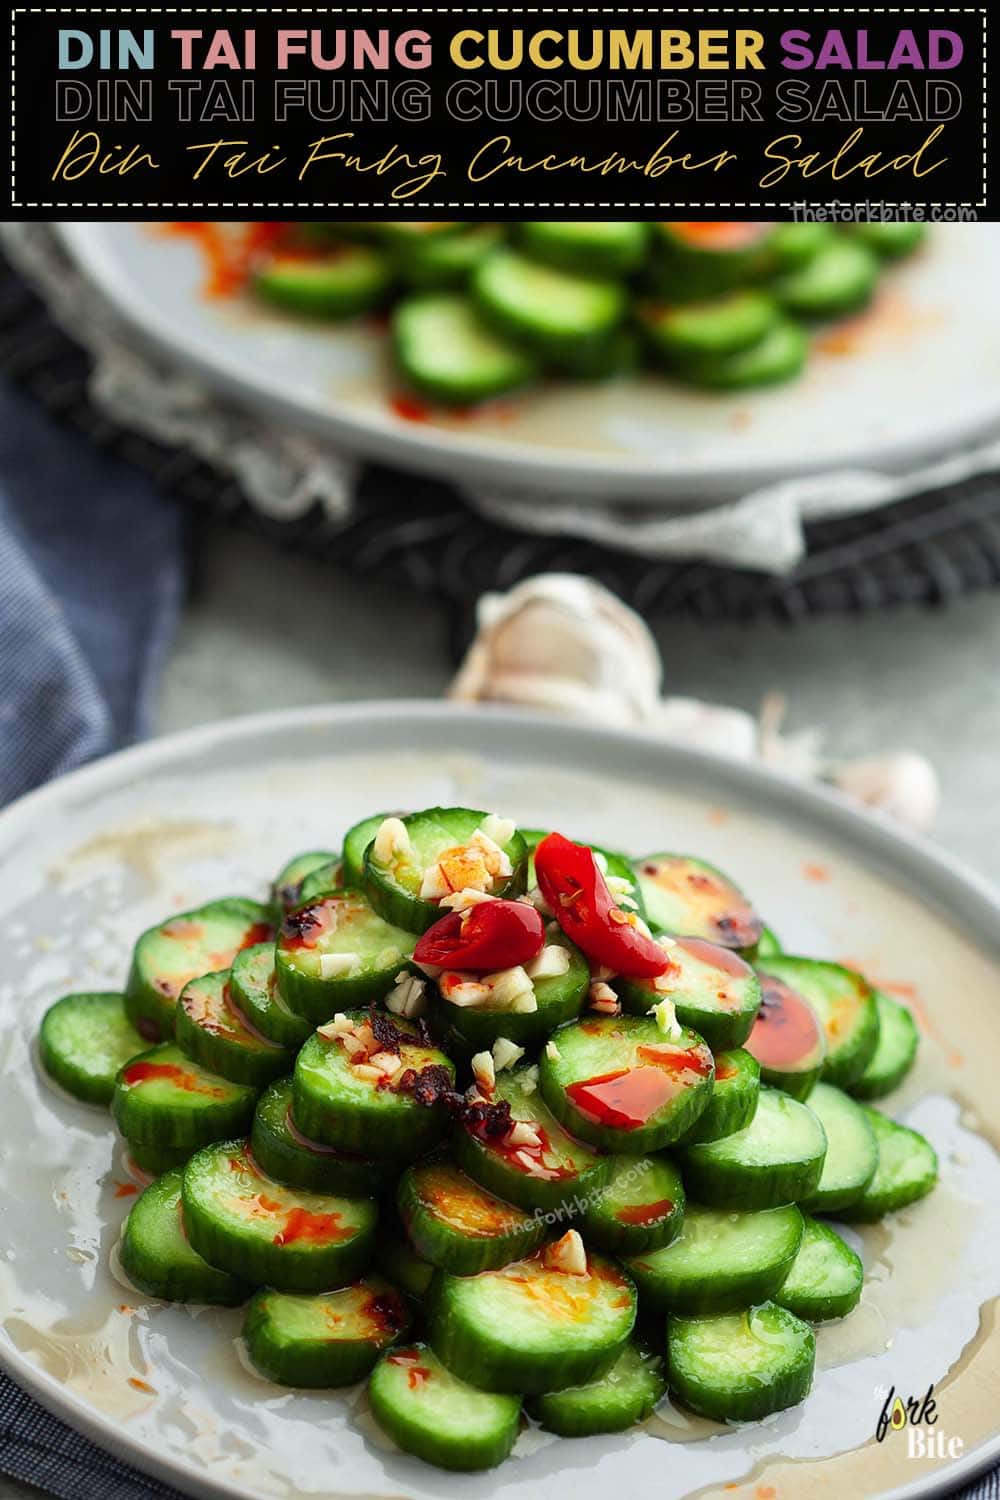 This crunchy Din Tai Fung cucumber salad is a refreshing side dish or appetizer that goes with any Asian meal.